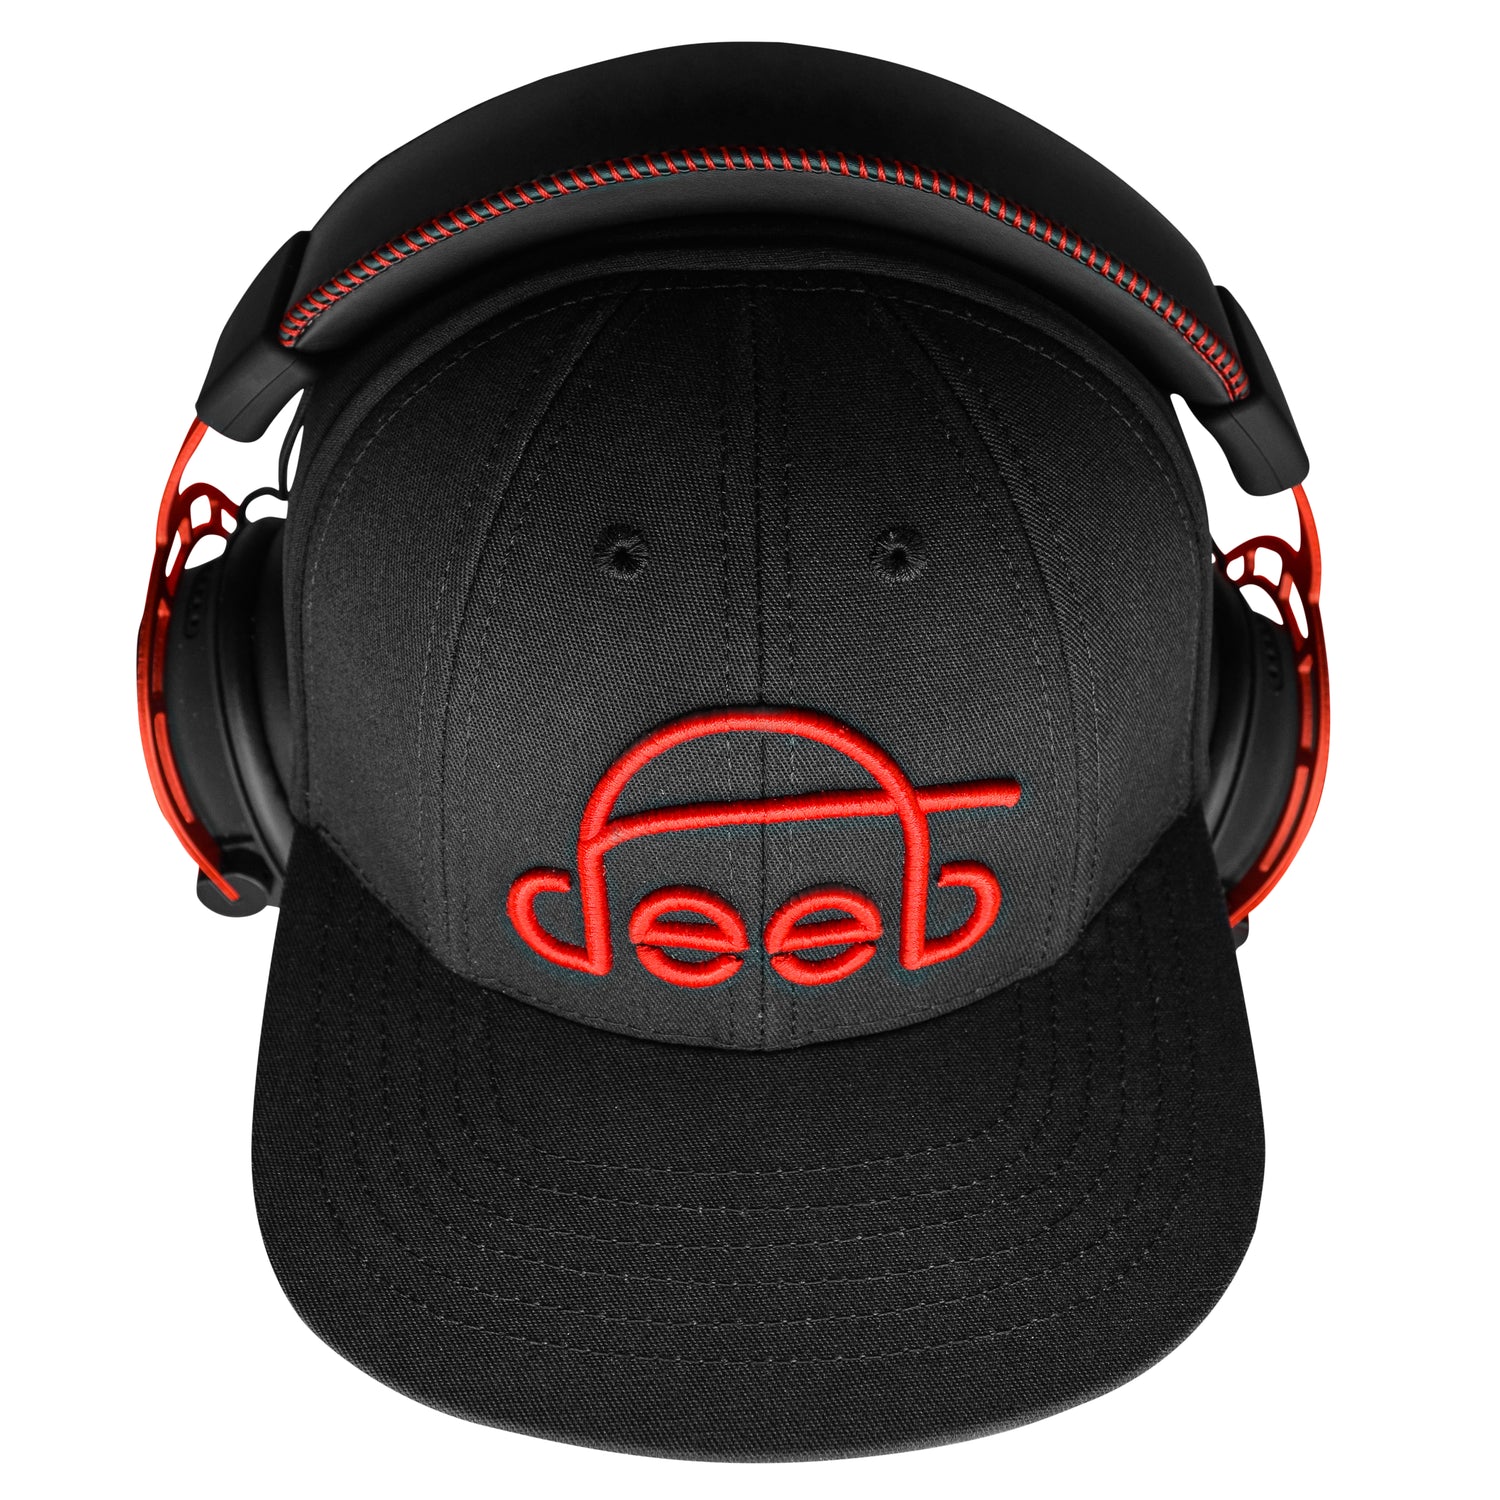 Hat to wear with headphones